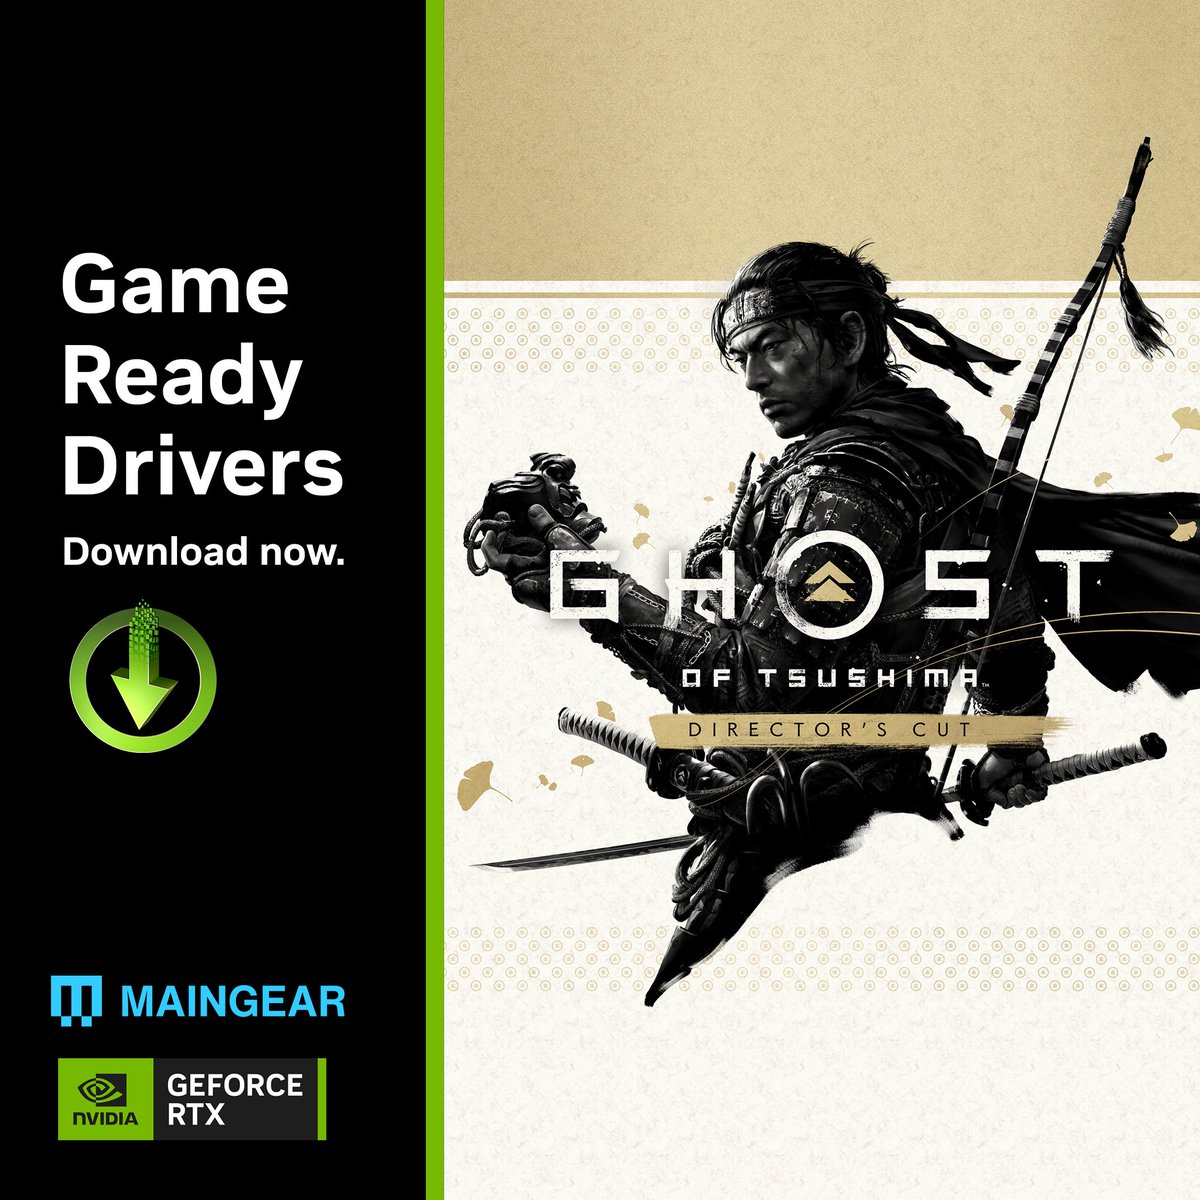 ⚠️ NEW DRIVER ALERT ⚠️ Get your MAINGEAR system Game Ready for the best experience in Ghost of Tsushima Director’s Cut with DLSS 3, DLAA, & Reflex! Learn More → nvidia.com/en-us/geforce/…